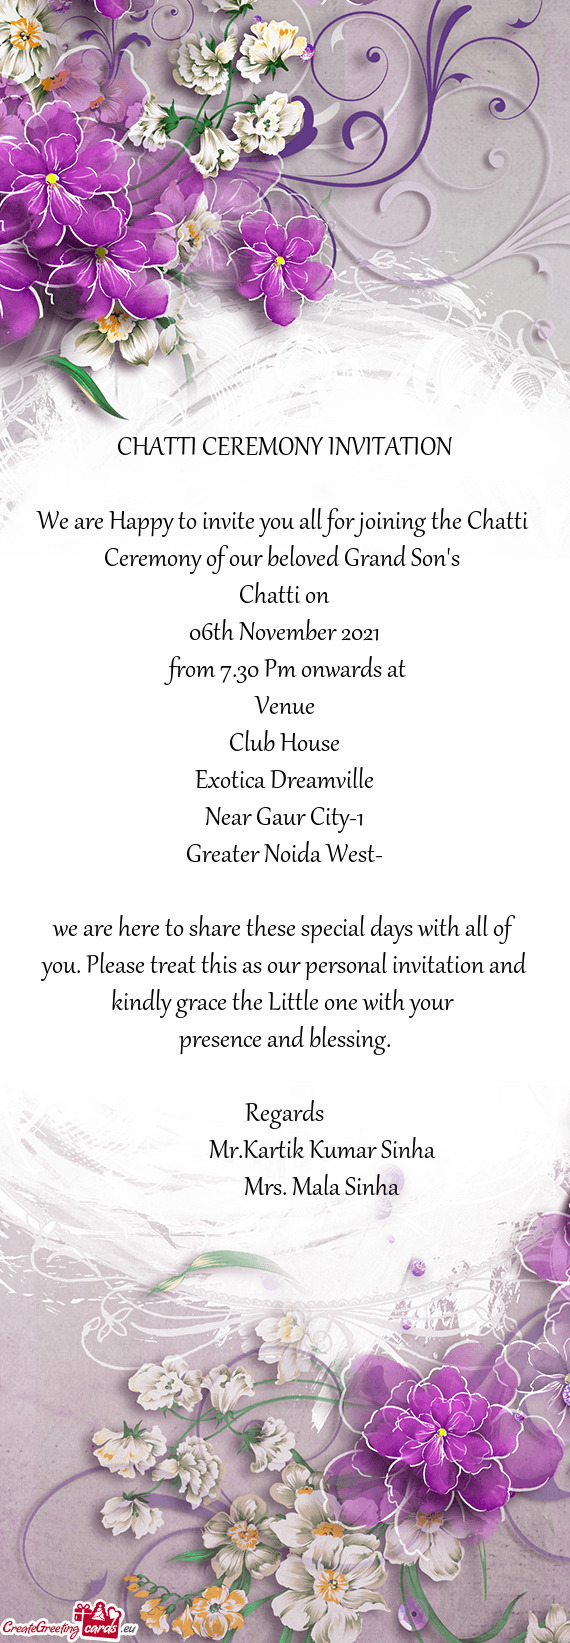 We are Happy to invite you all for joining the Chatti Ceremony of our beloved Grand Son